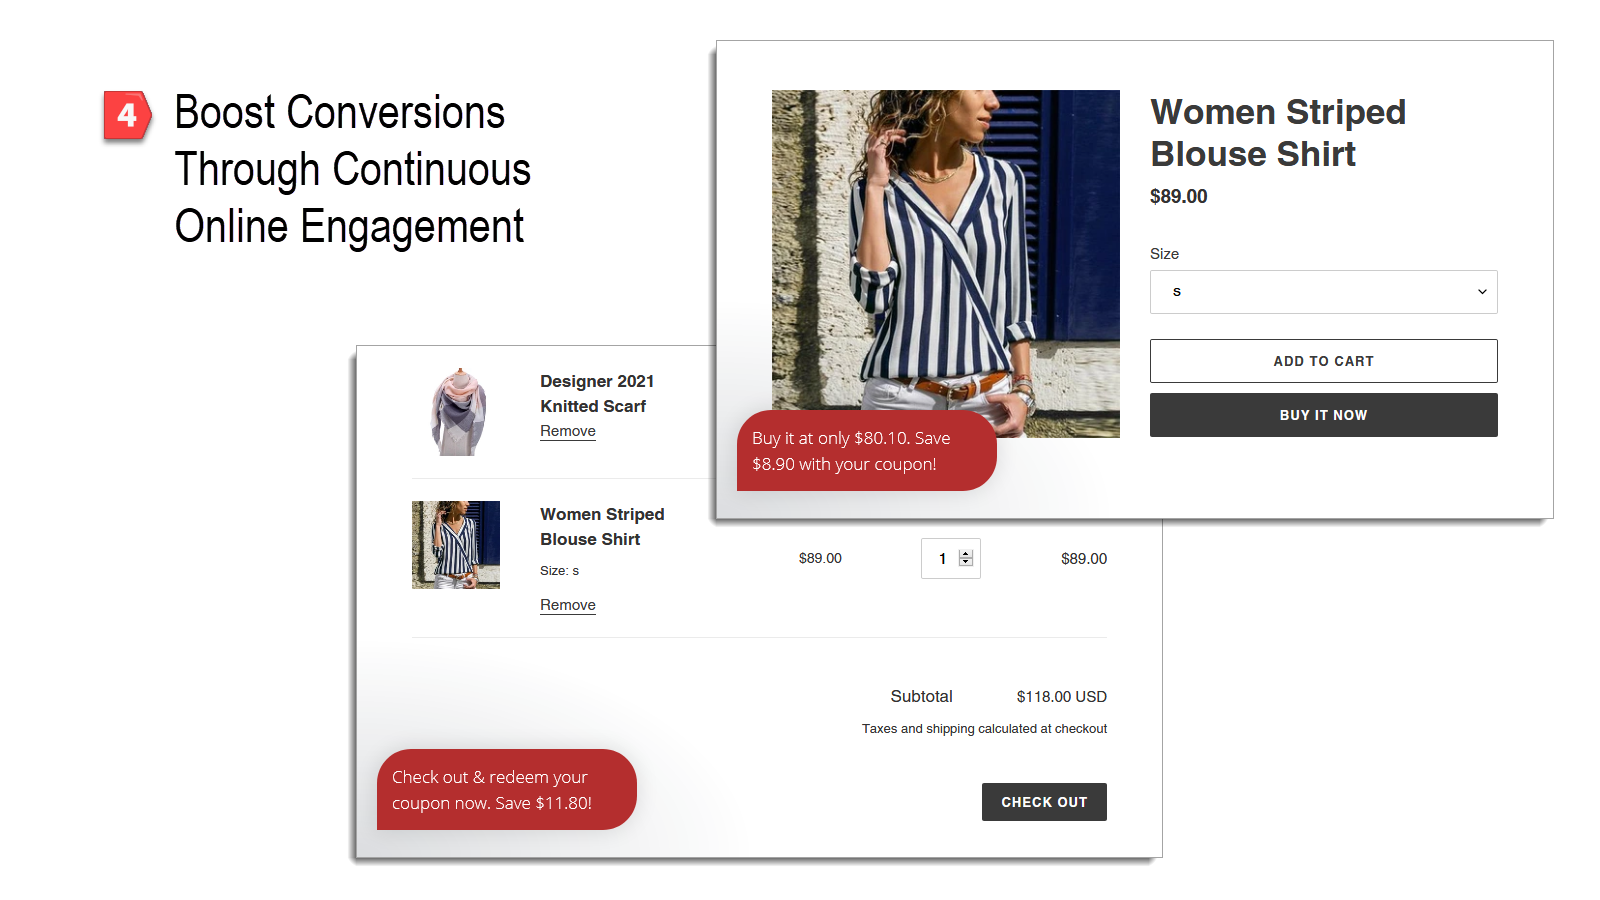 Boost conversions through continuous online engagement